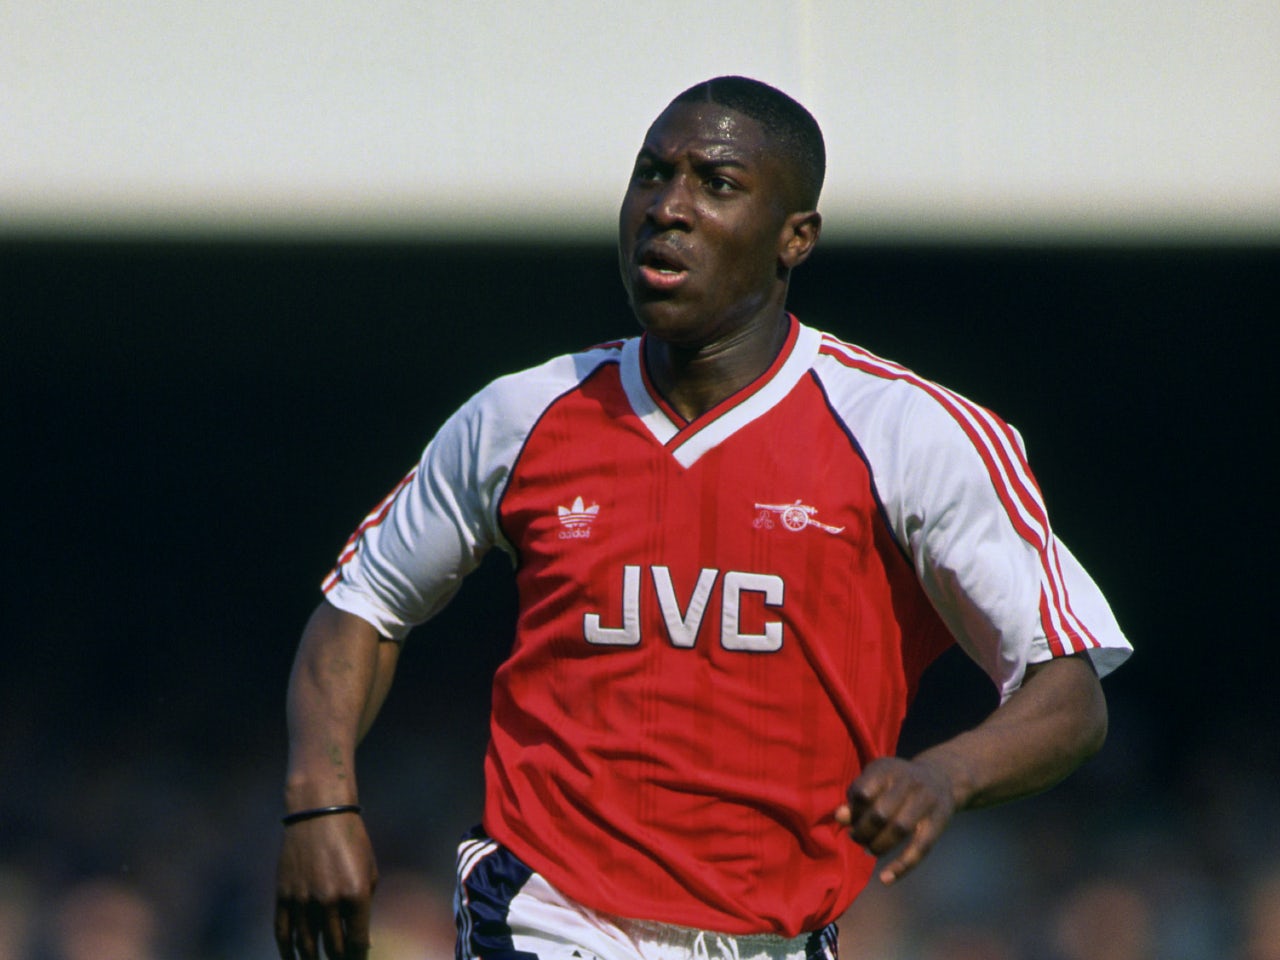 Former Arsenal and Everton striker Kevin Campbell dies aged 54 following illness